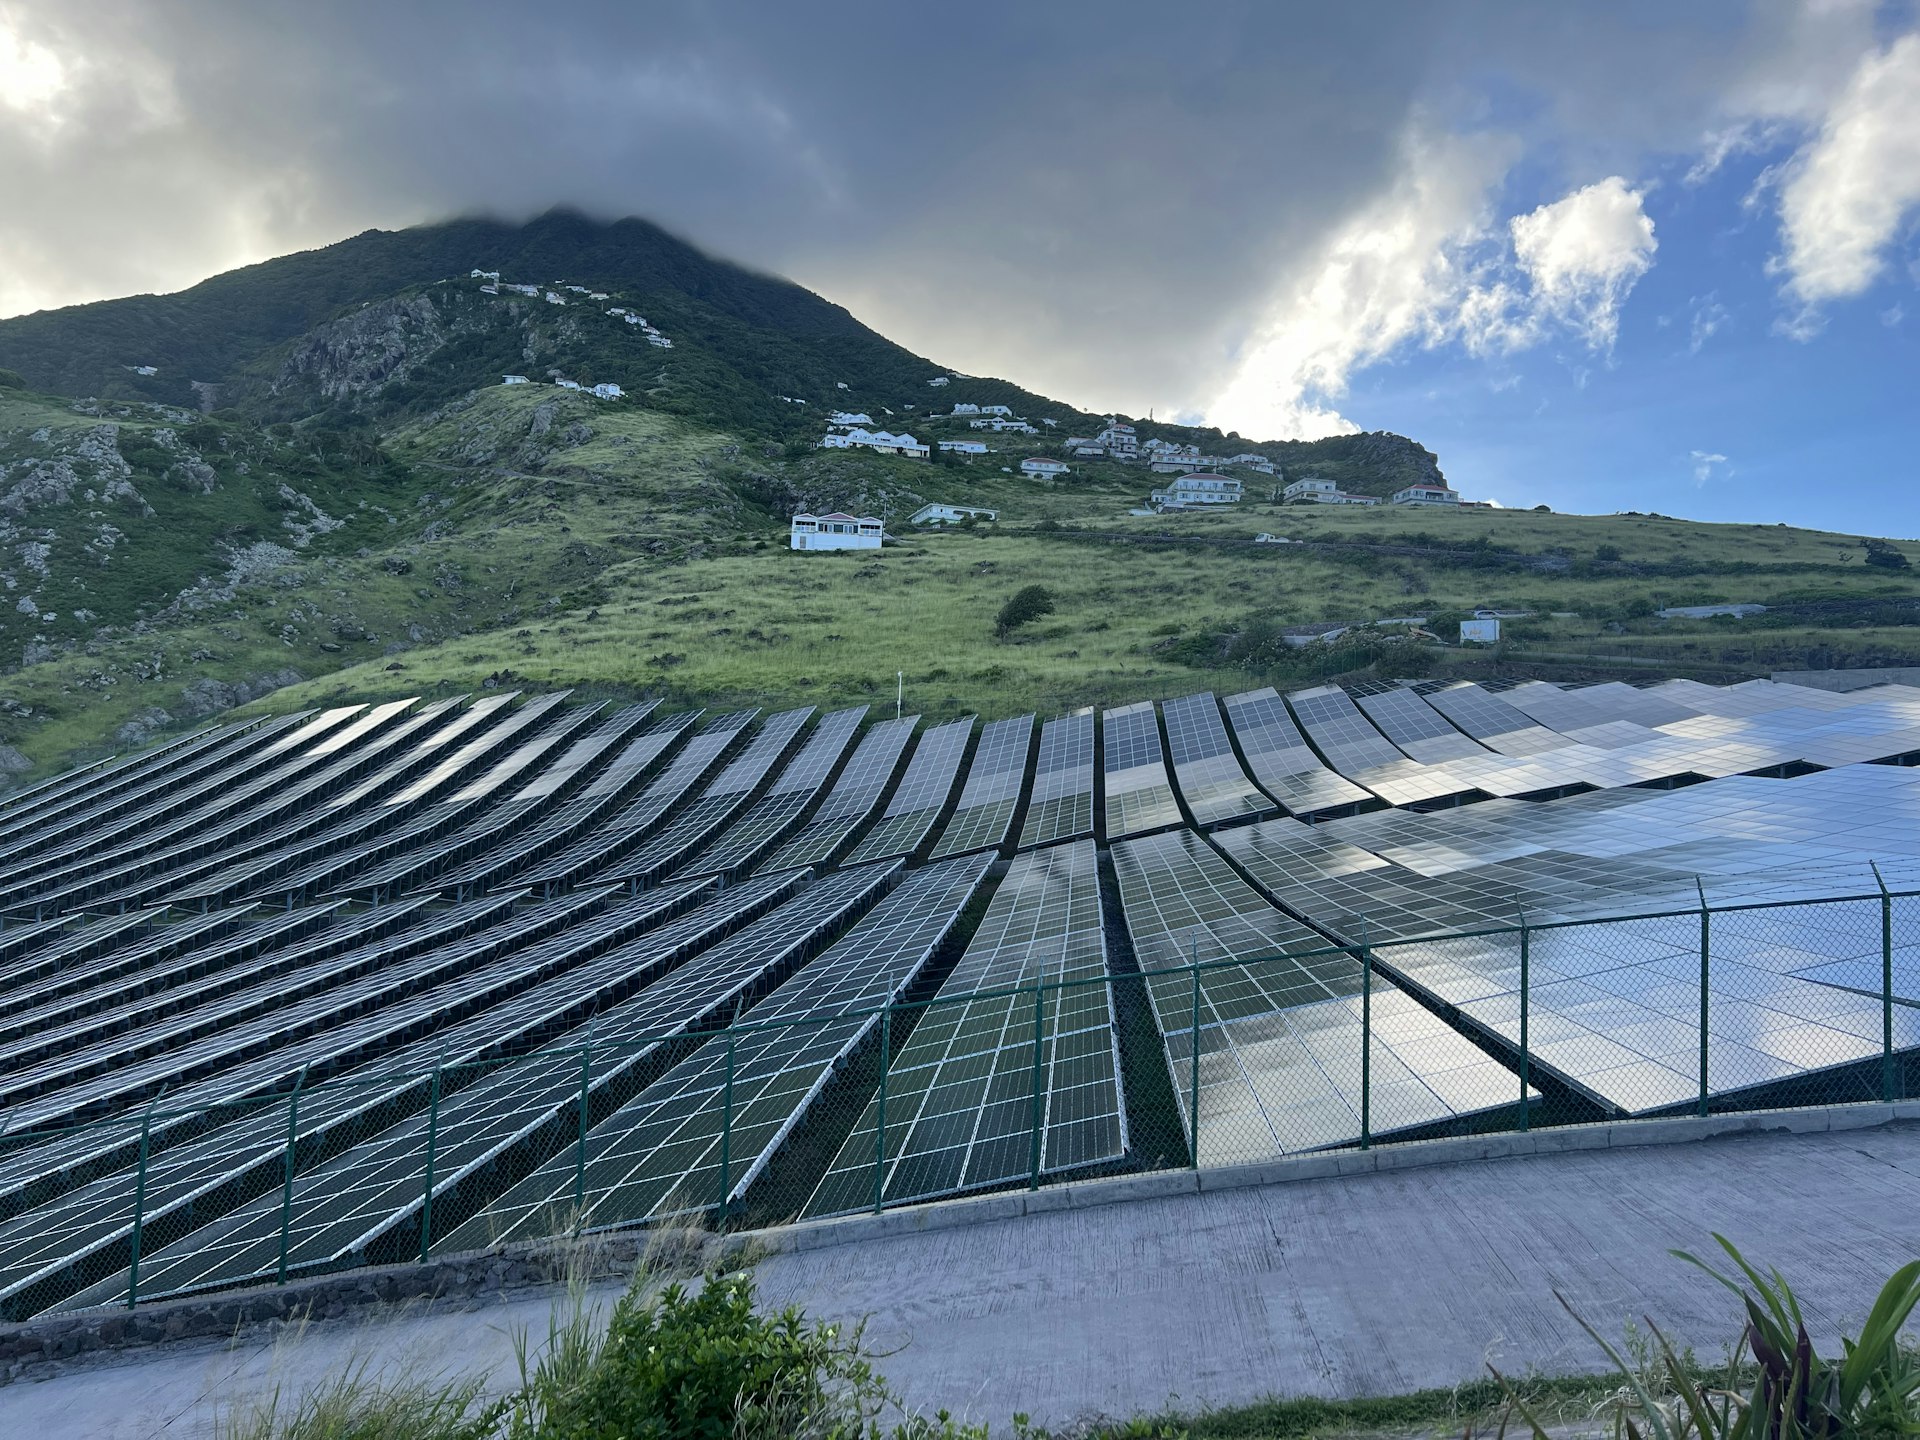 Rows of solar panels along the green mountains of the island of Saba